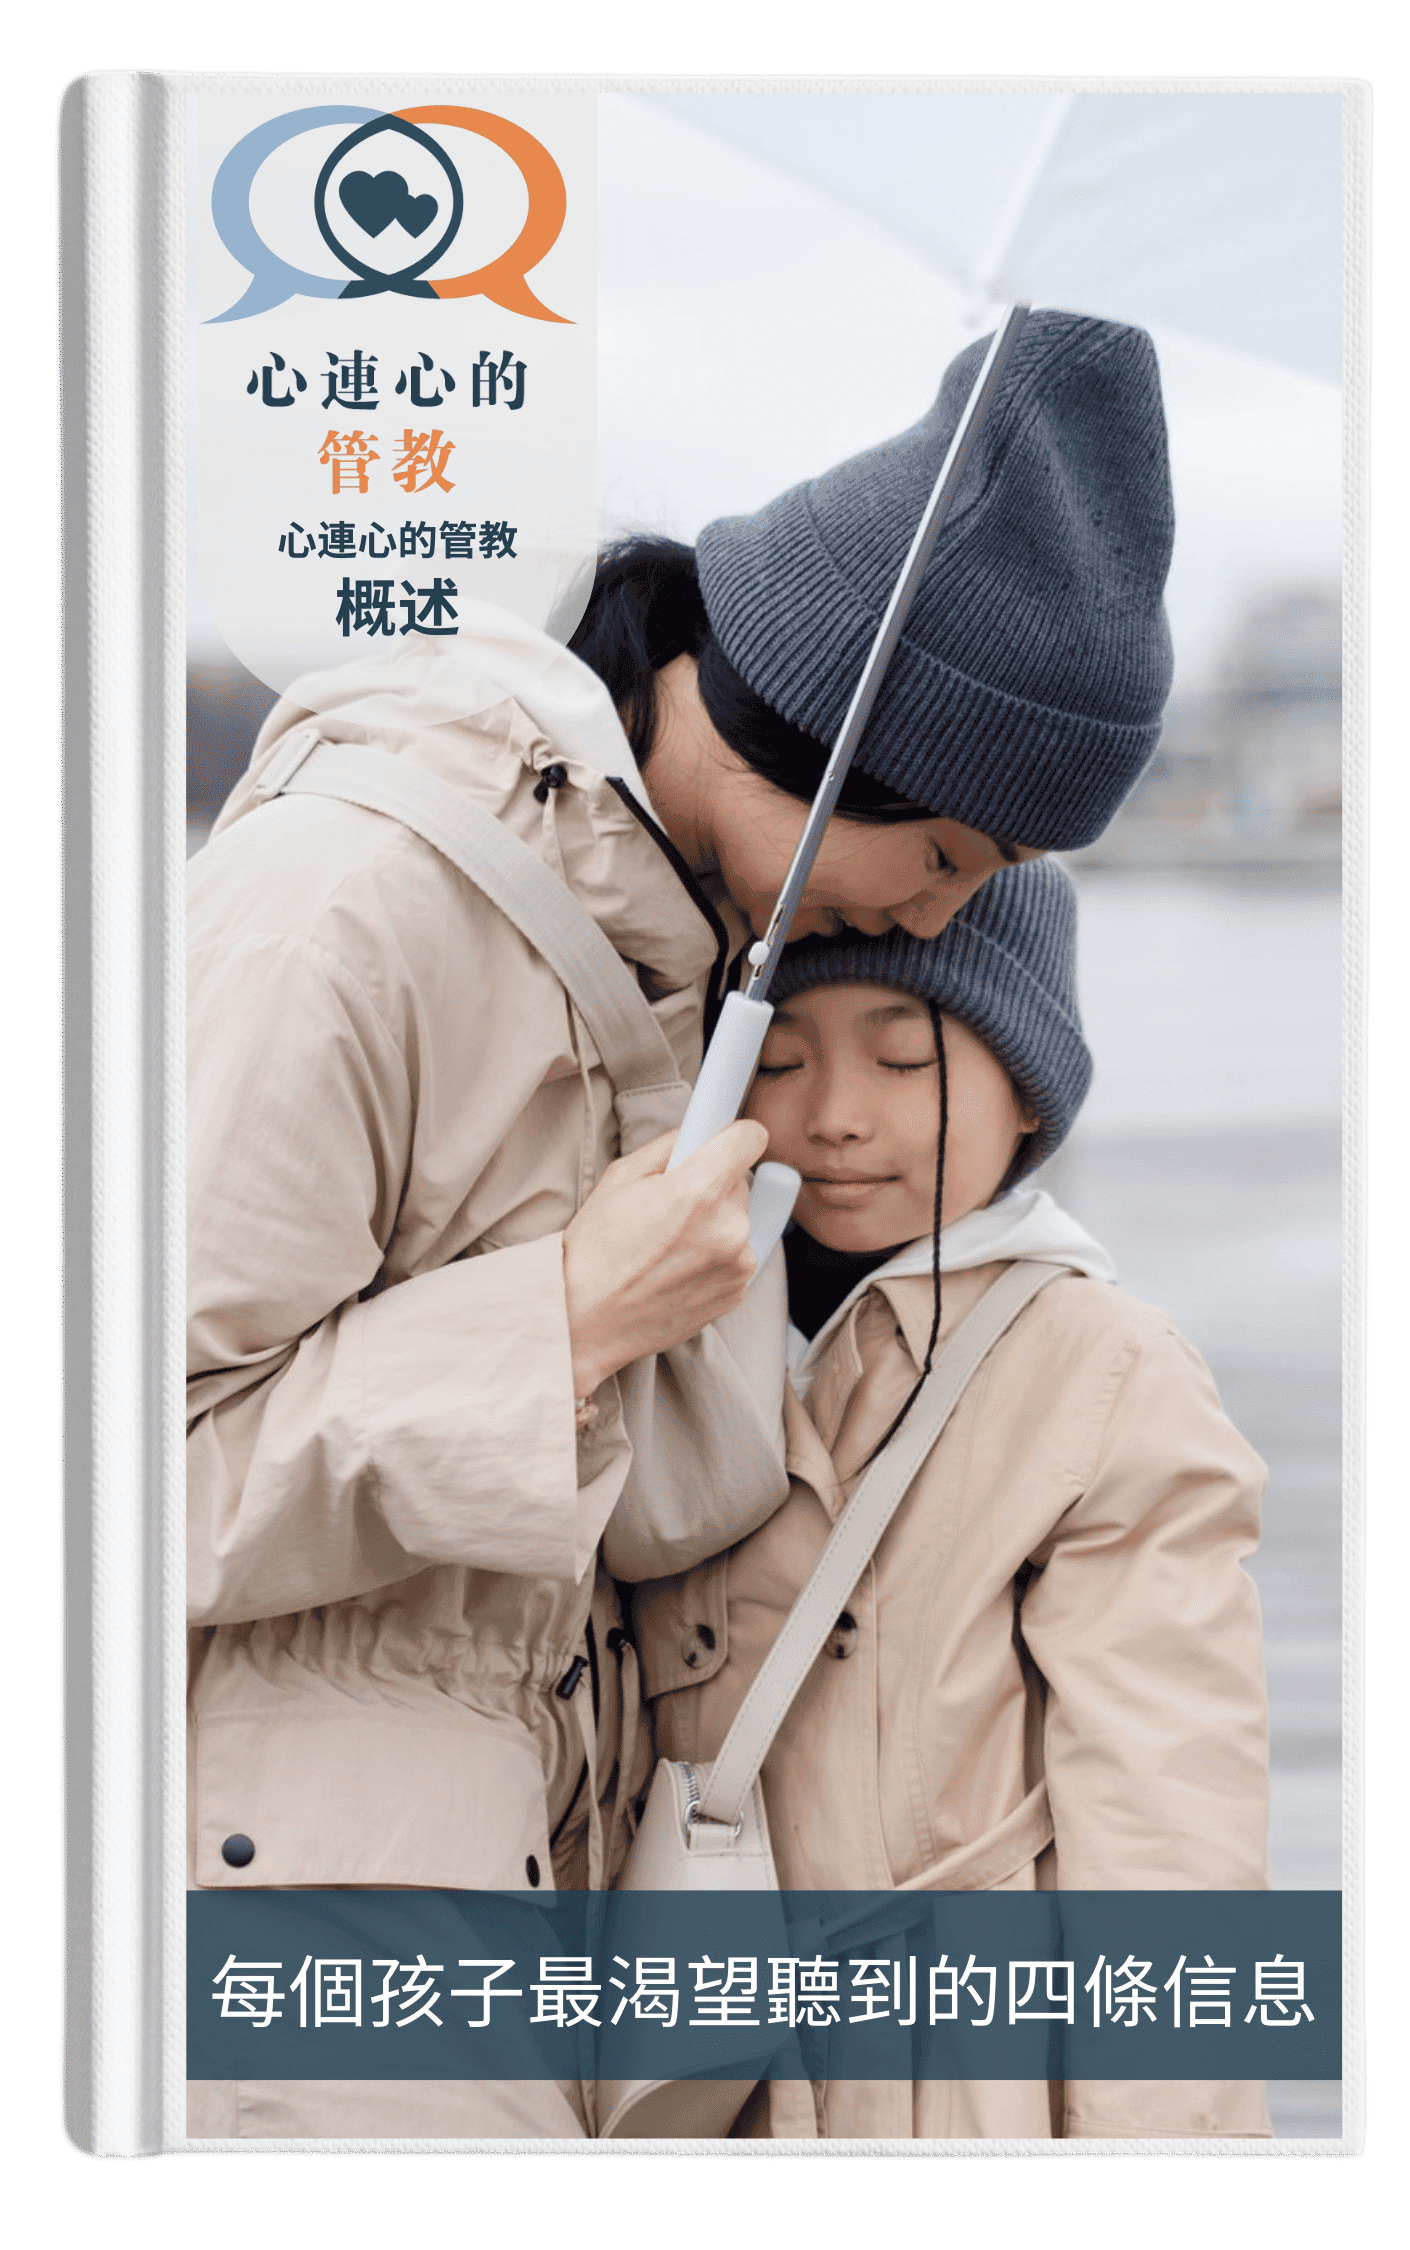 Chinese 4 messages book traditional min